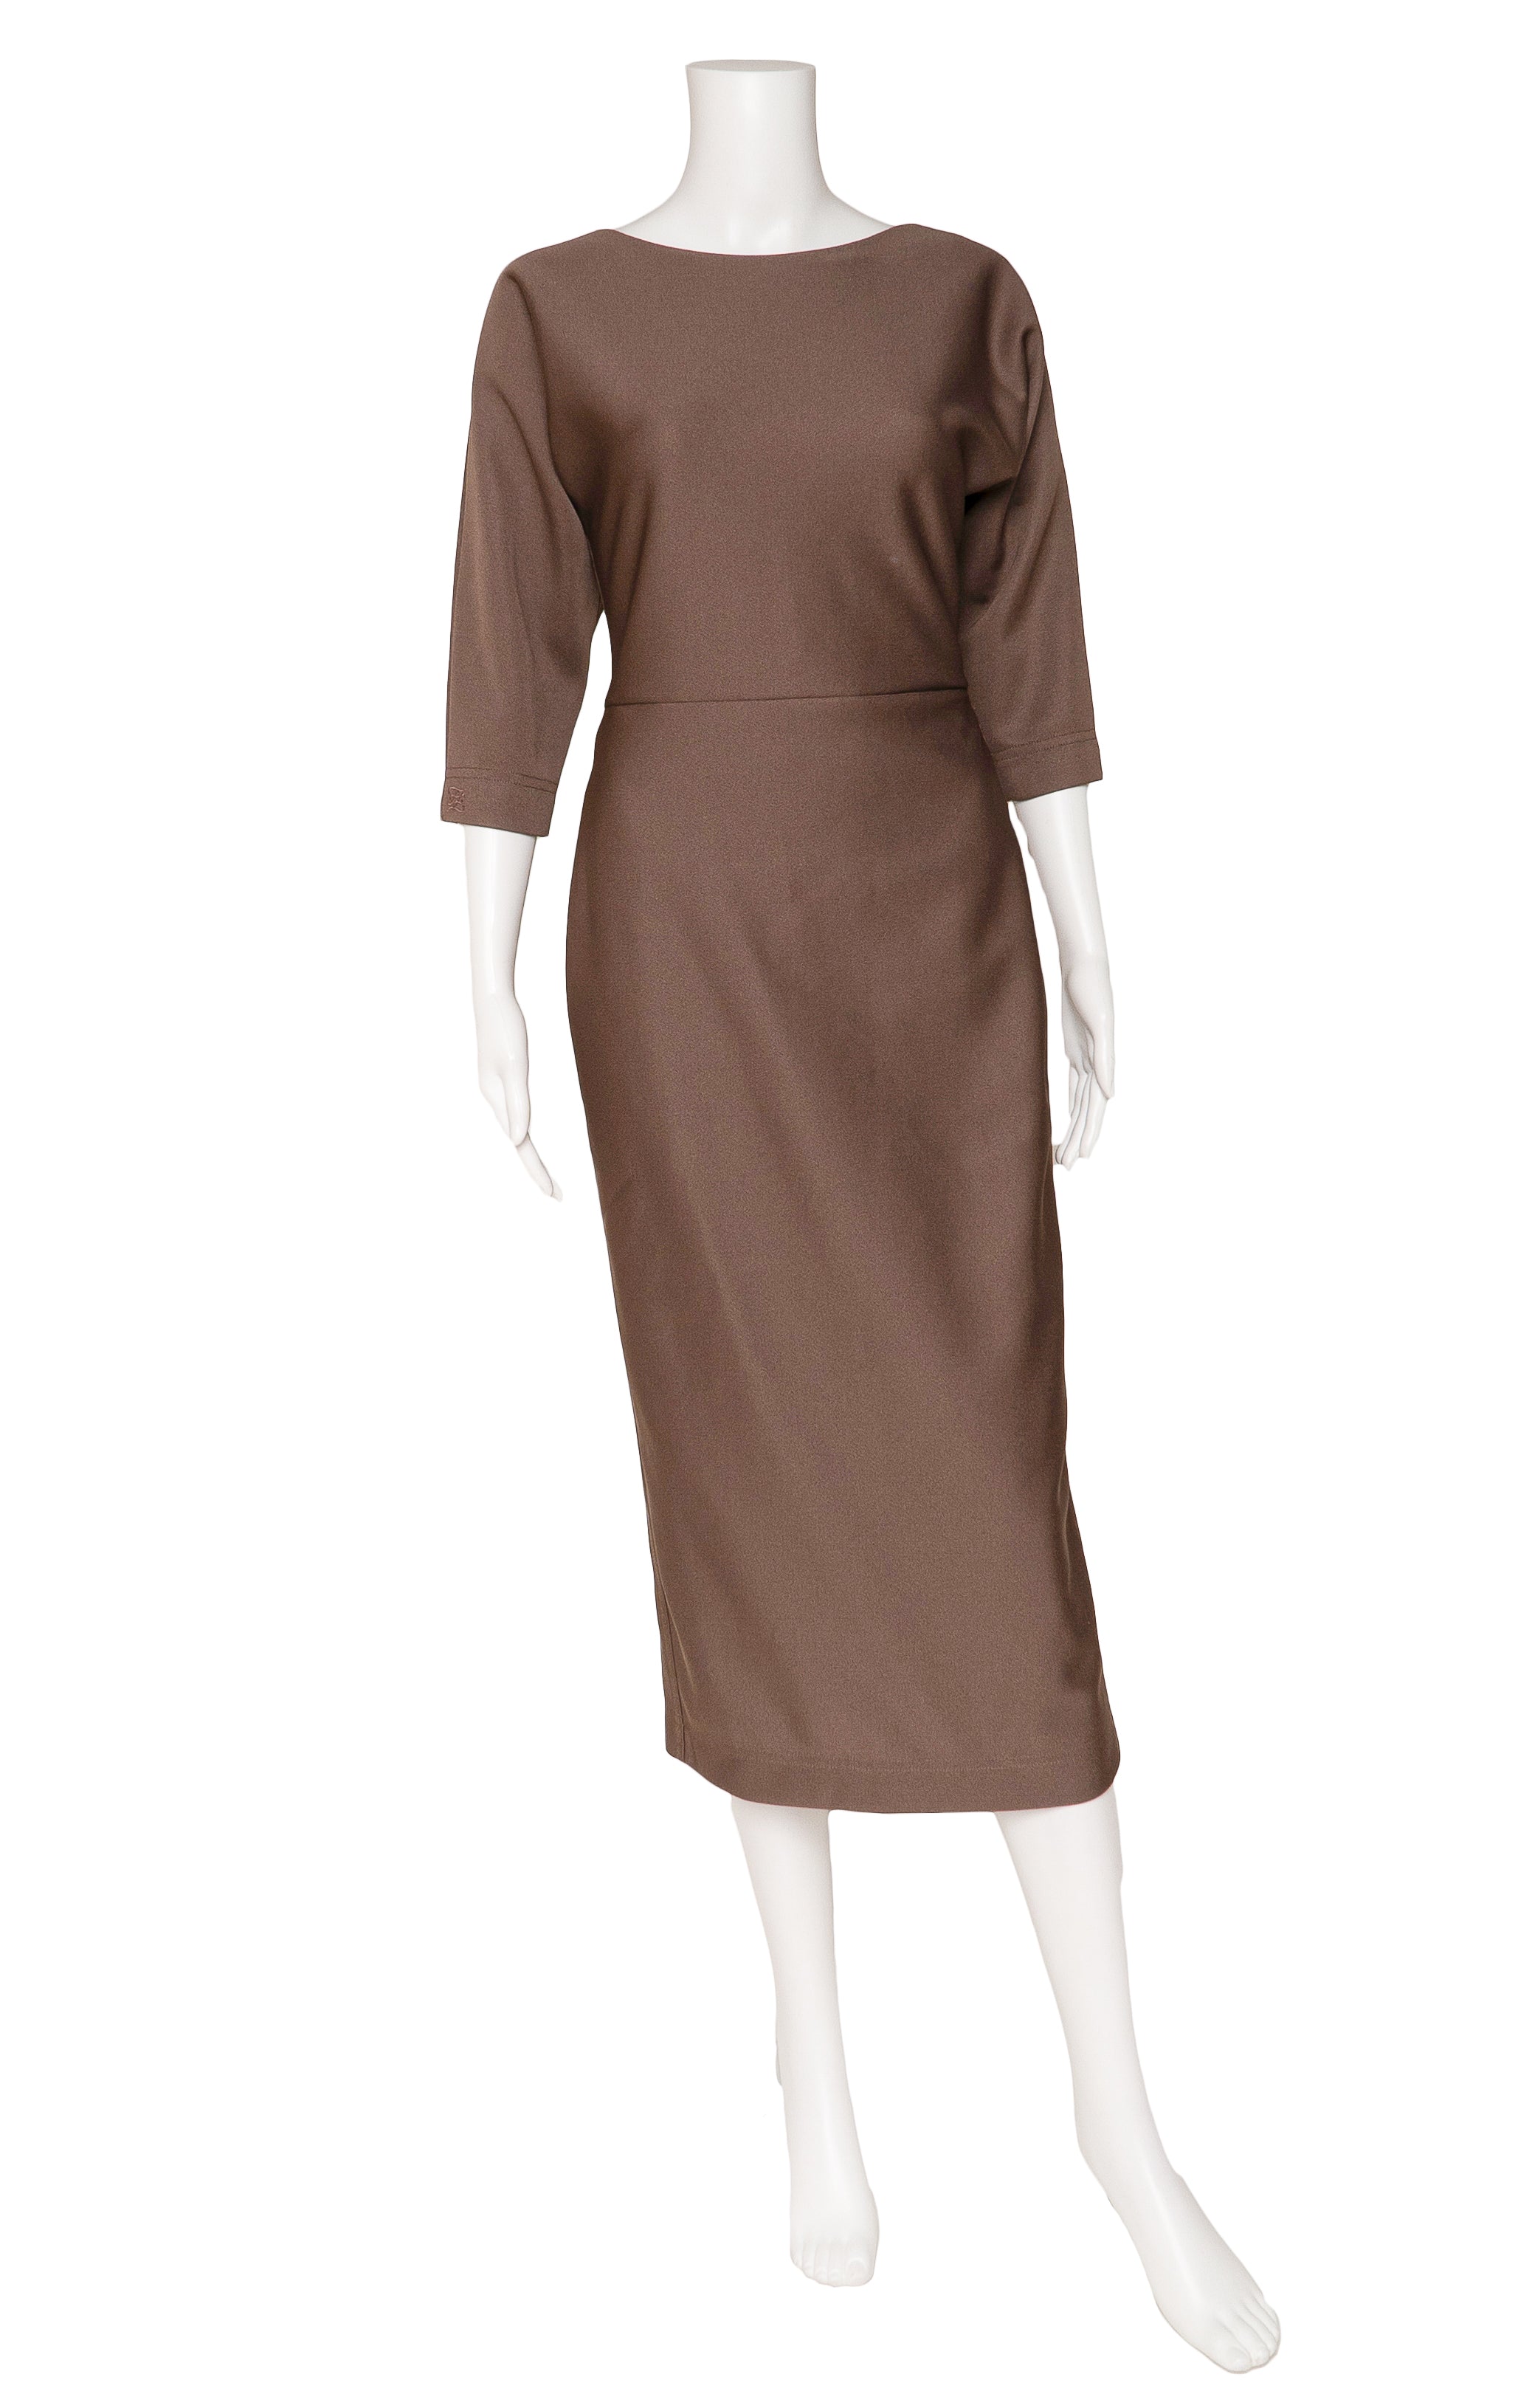 FENDI with tags  Dress Size: IT 40 (comparable to US 2-4)